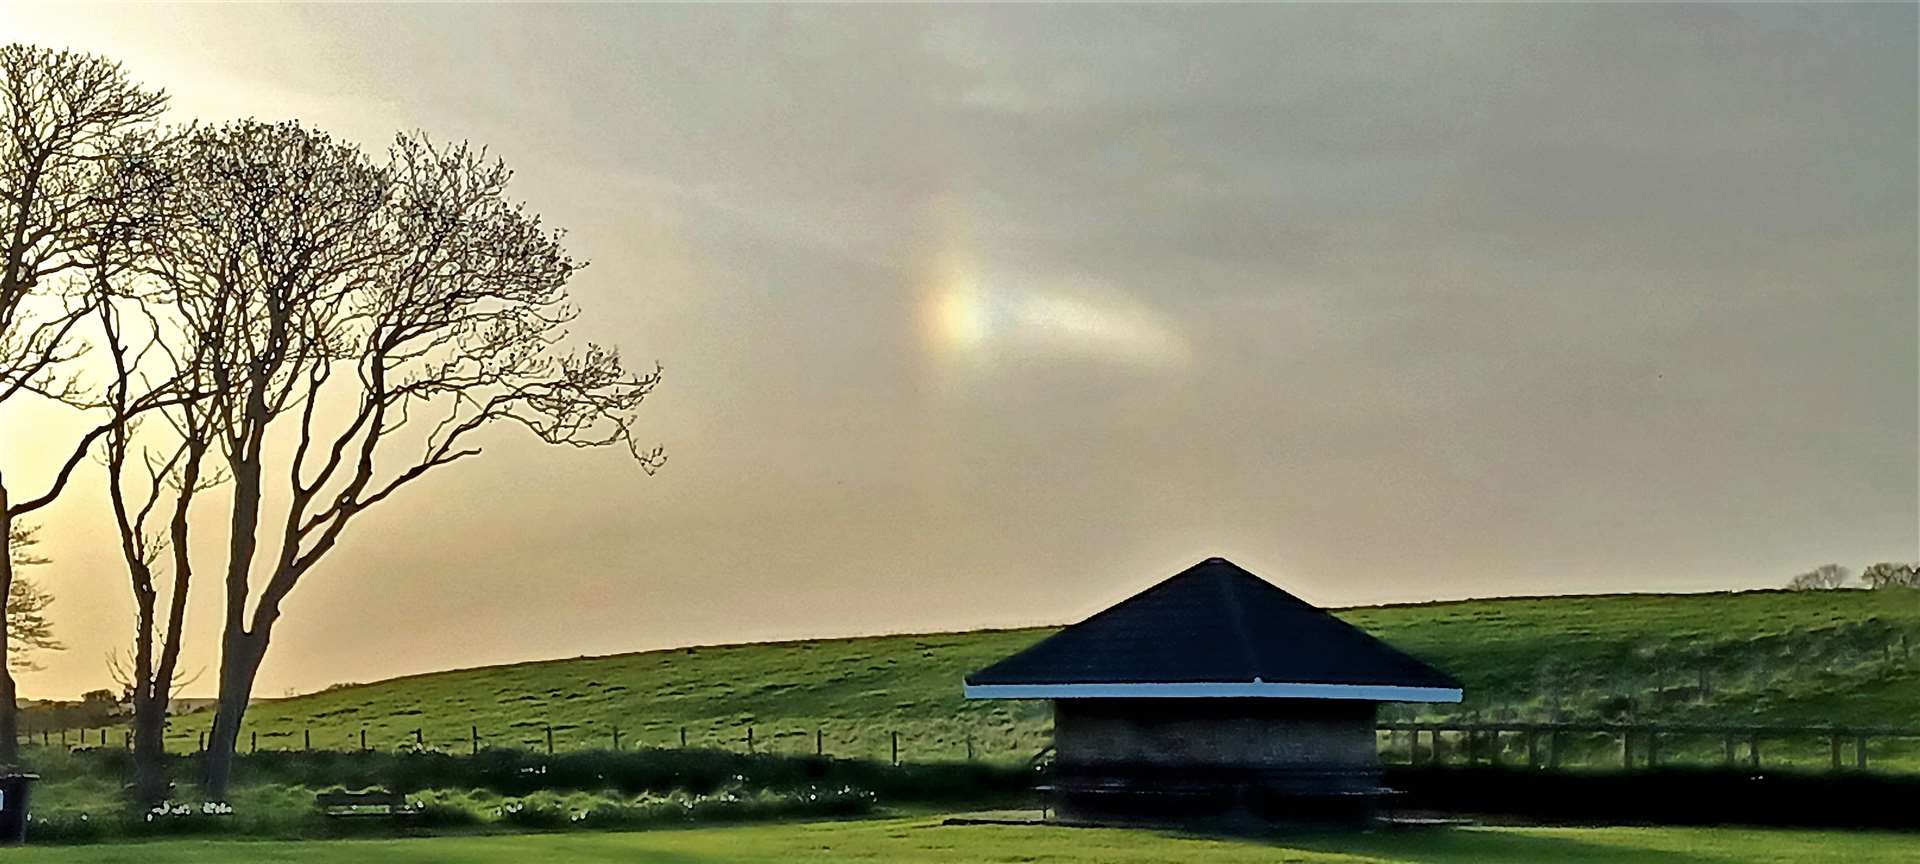 This mini rainbow was seen on Saturday evening at Wick riverside and is known as a sun dog or parhelion. Picture: DGS